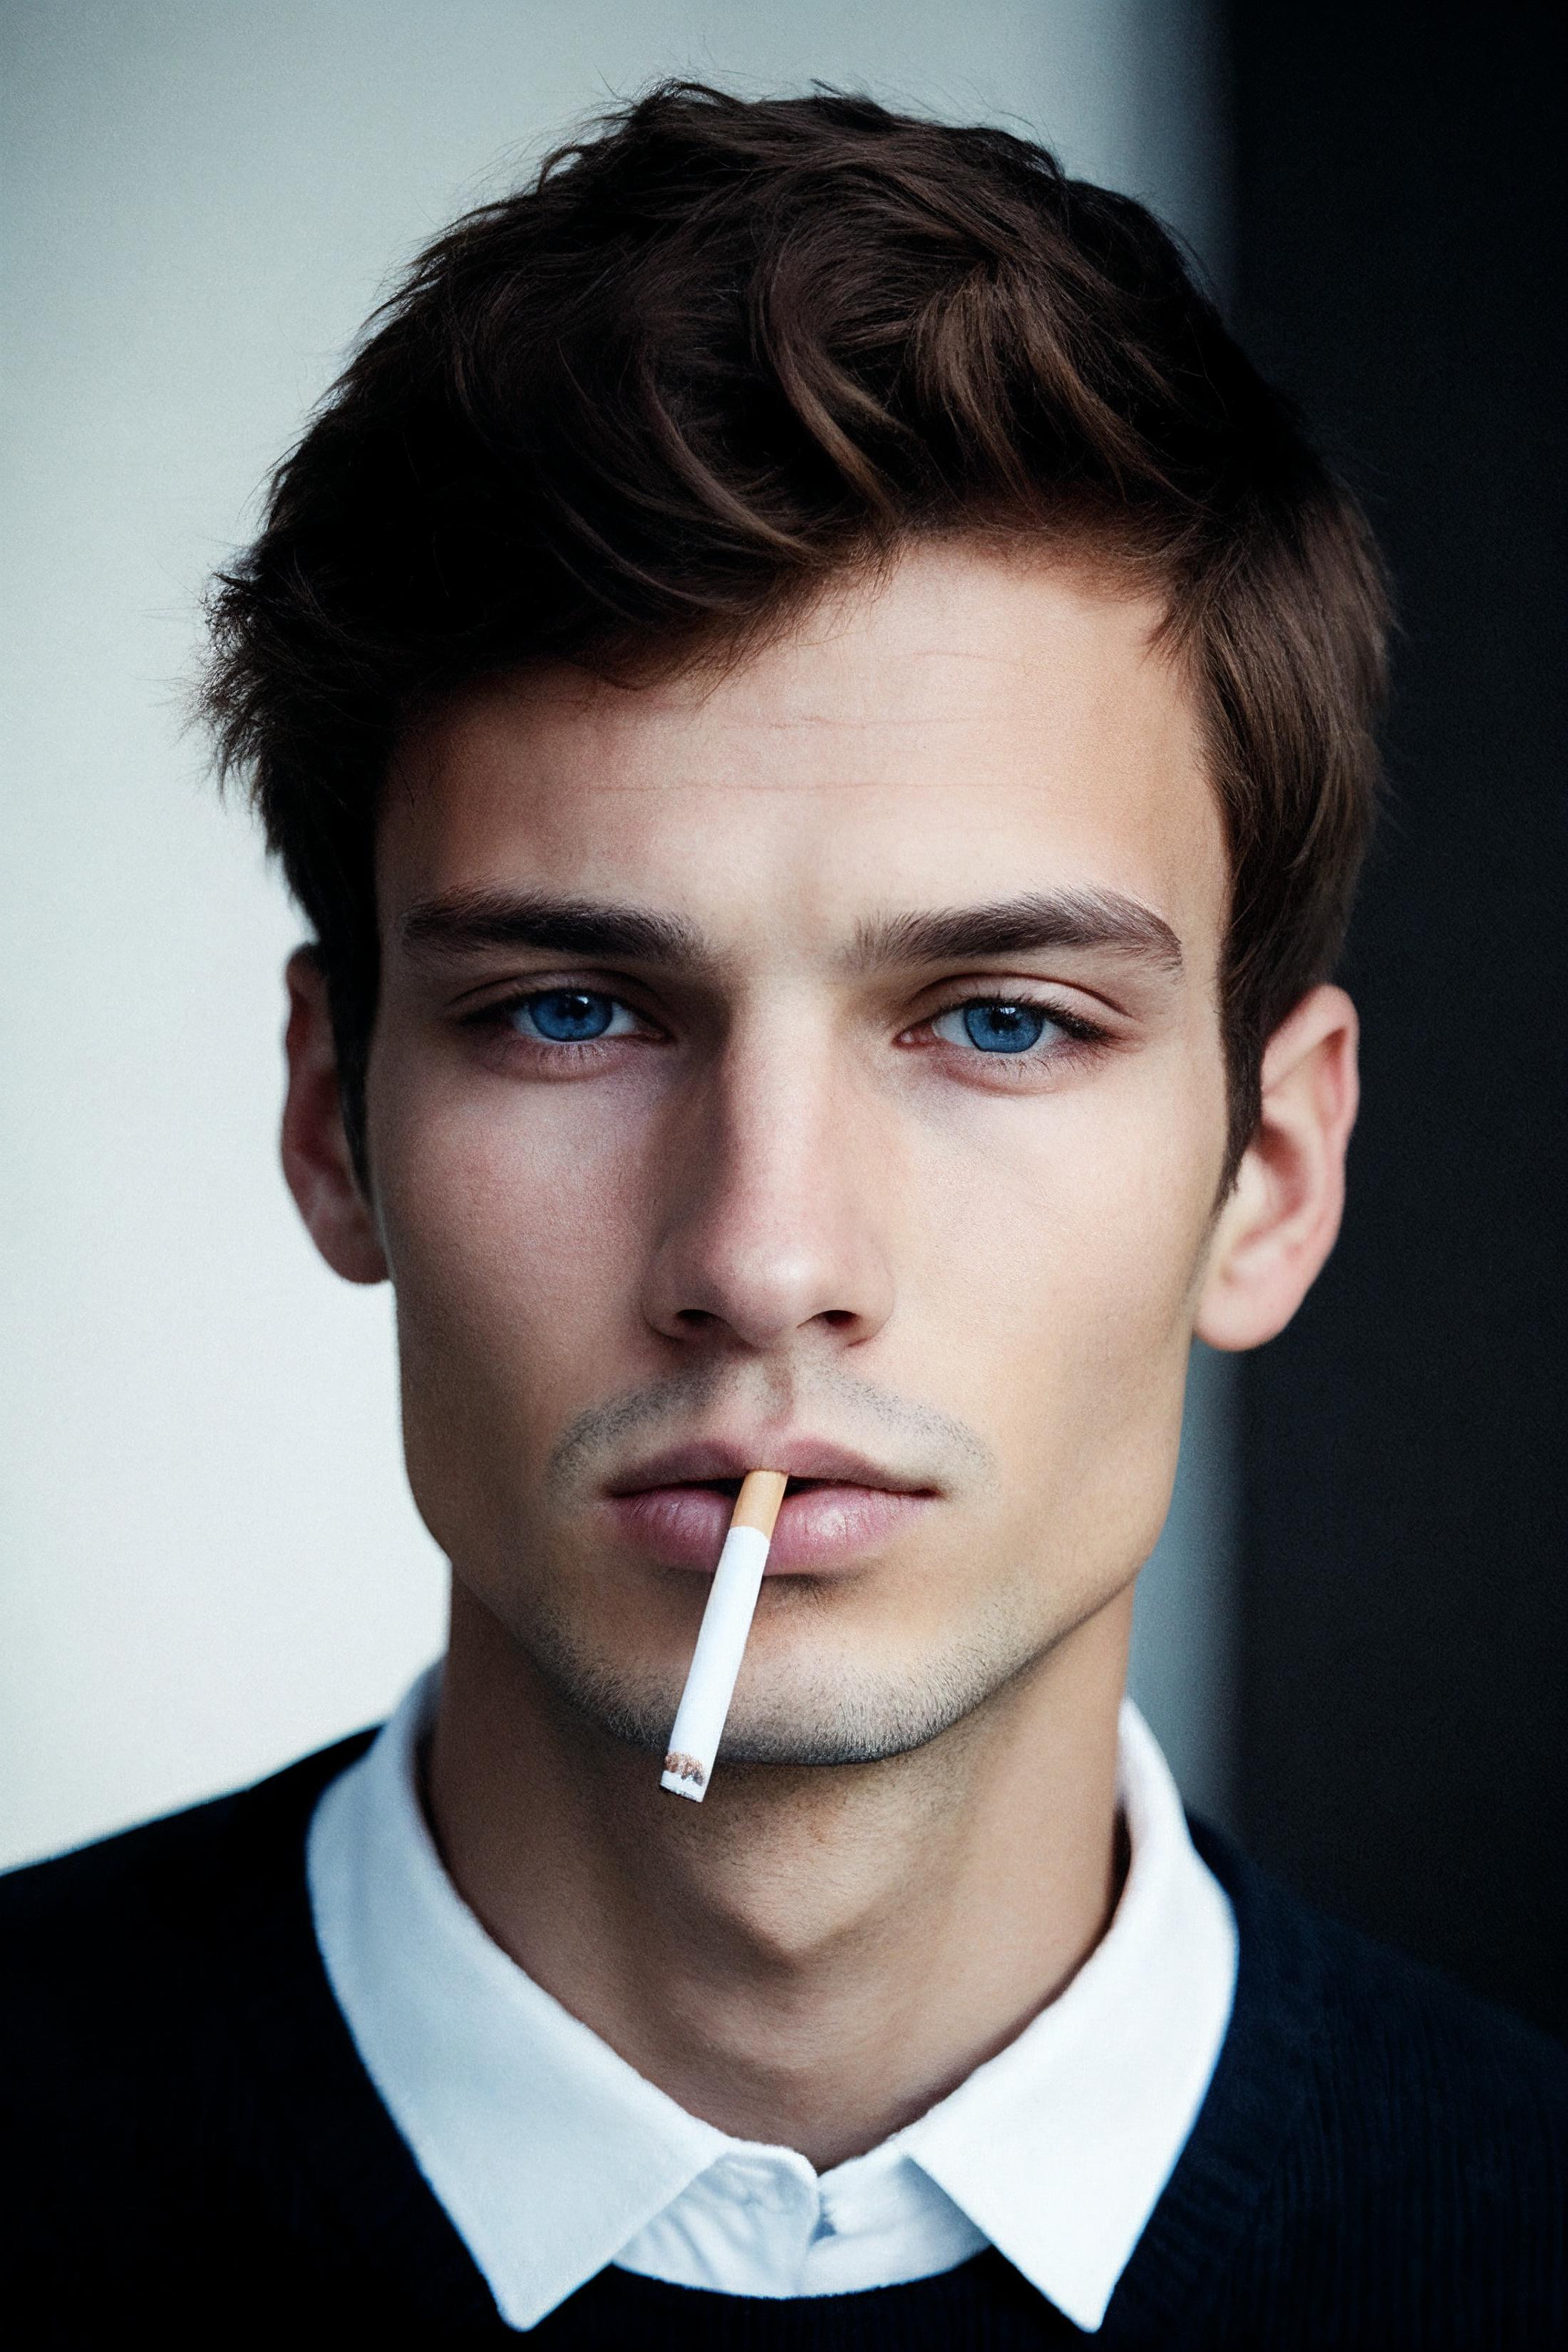 Cigarette in mouth. image by Tigra